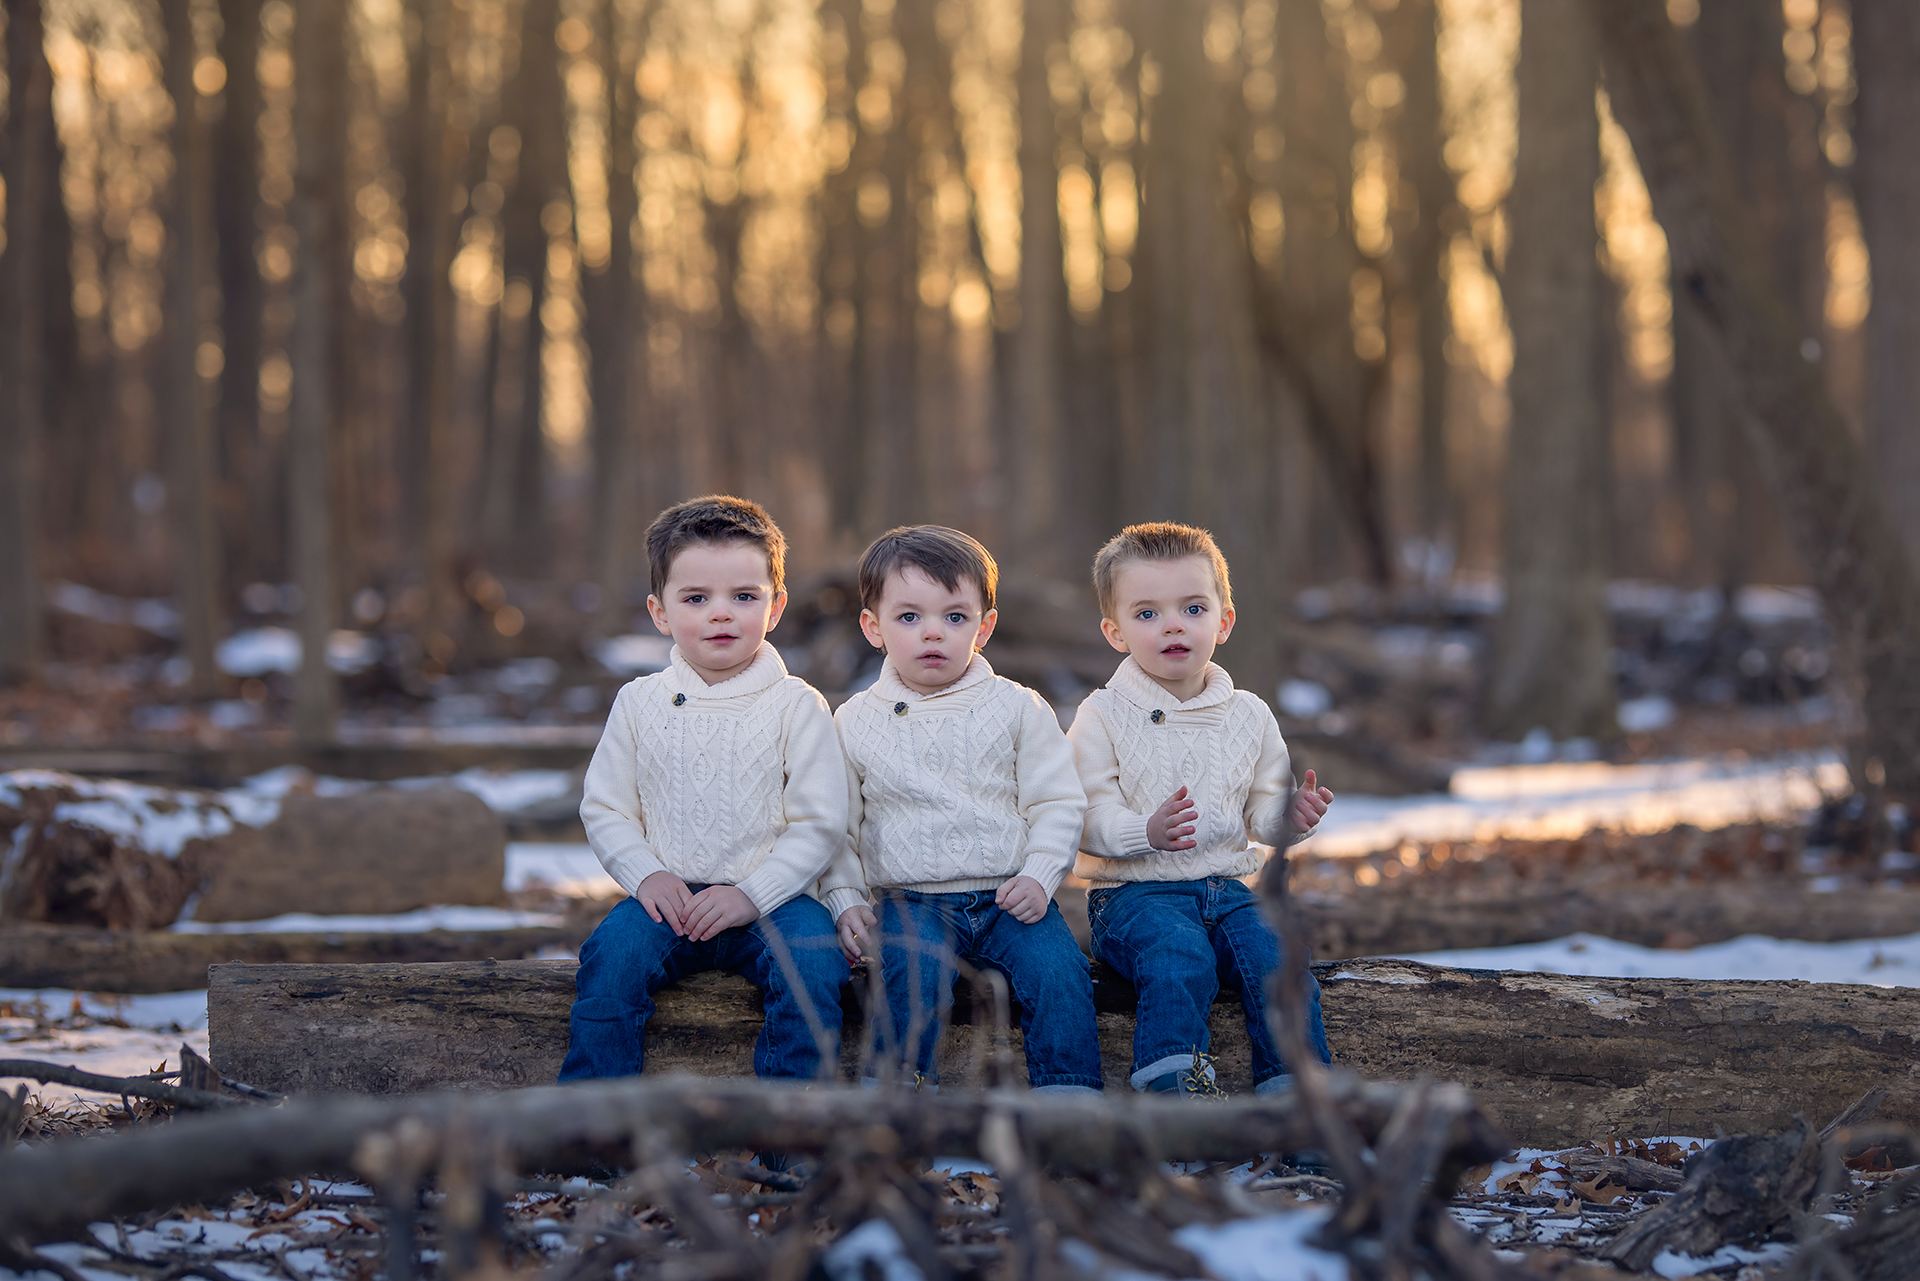 Three children pose among a snowy woodland landscape wearing coordinating white outfits for a family holiday photoshoot in Detroit.